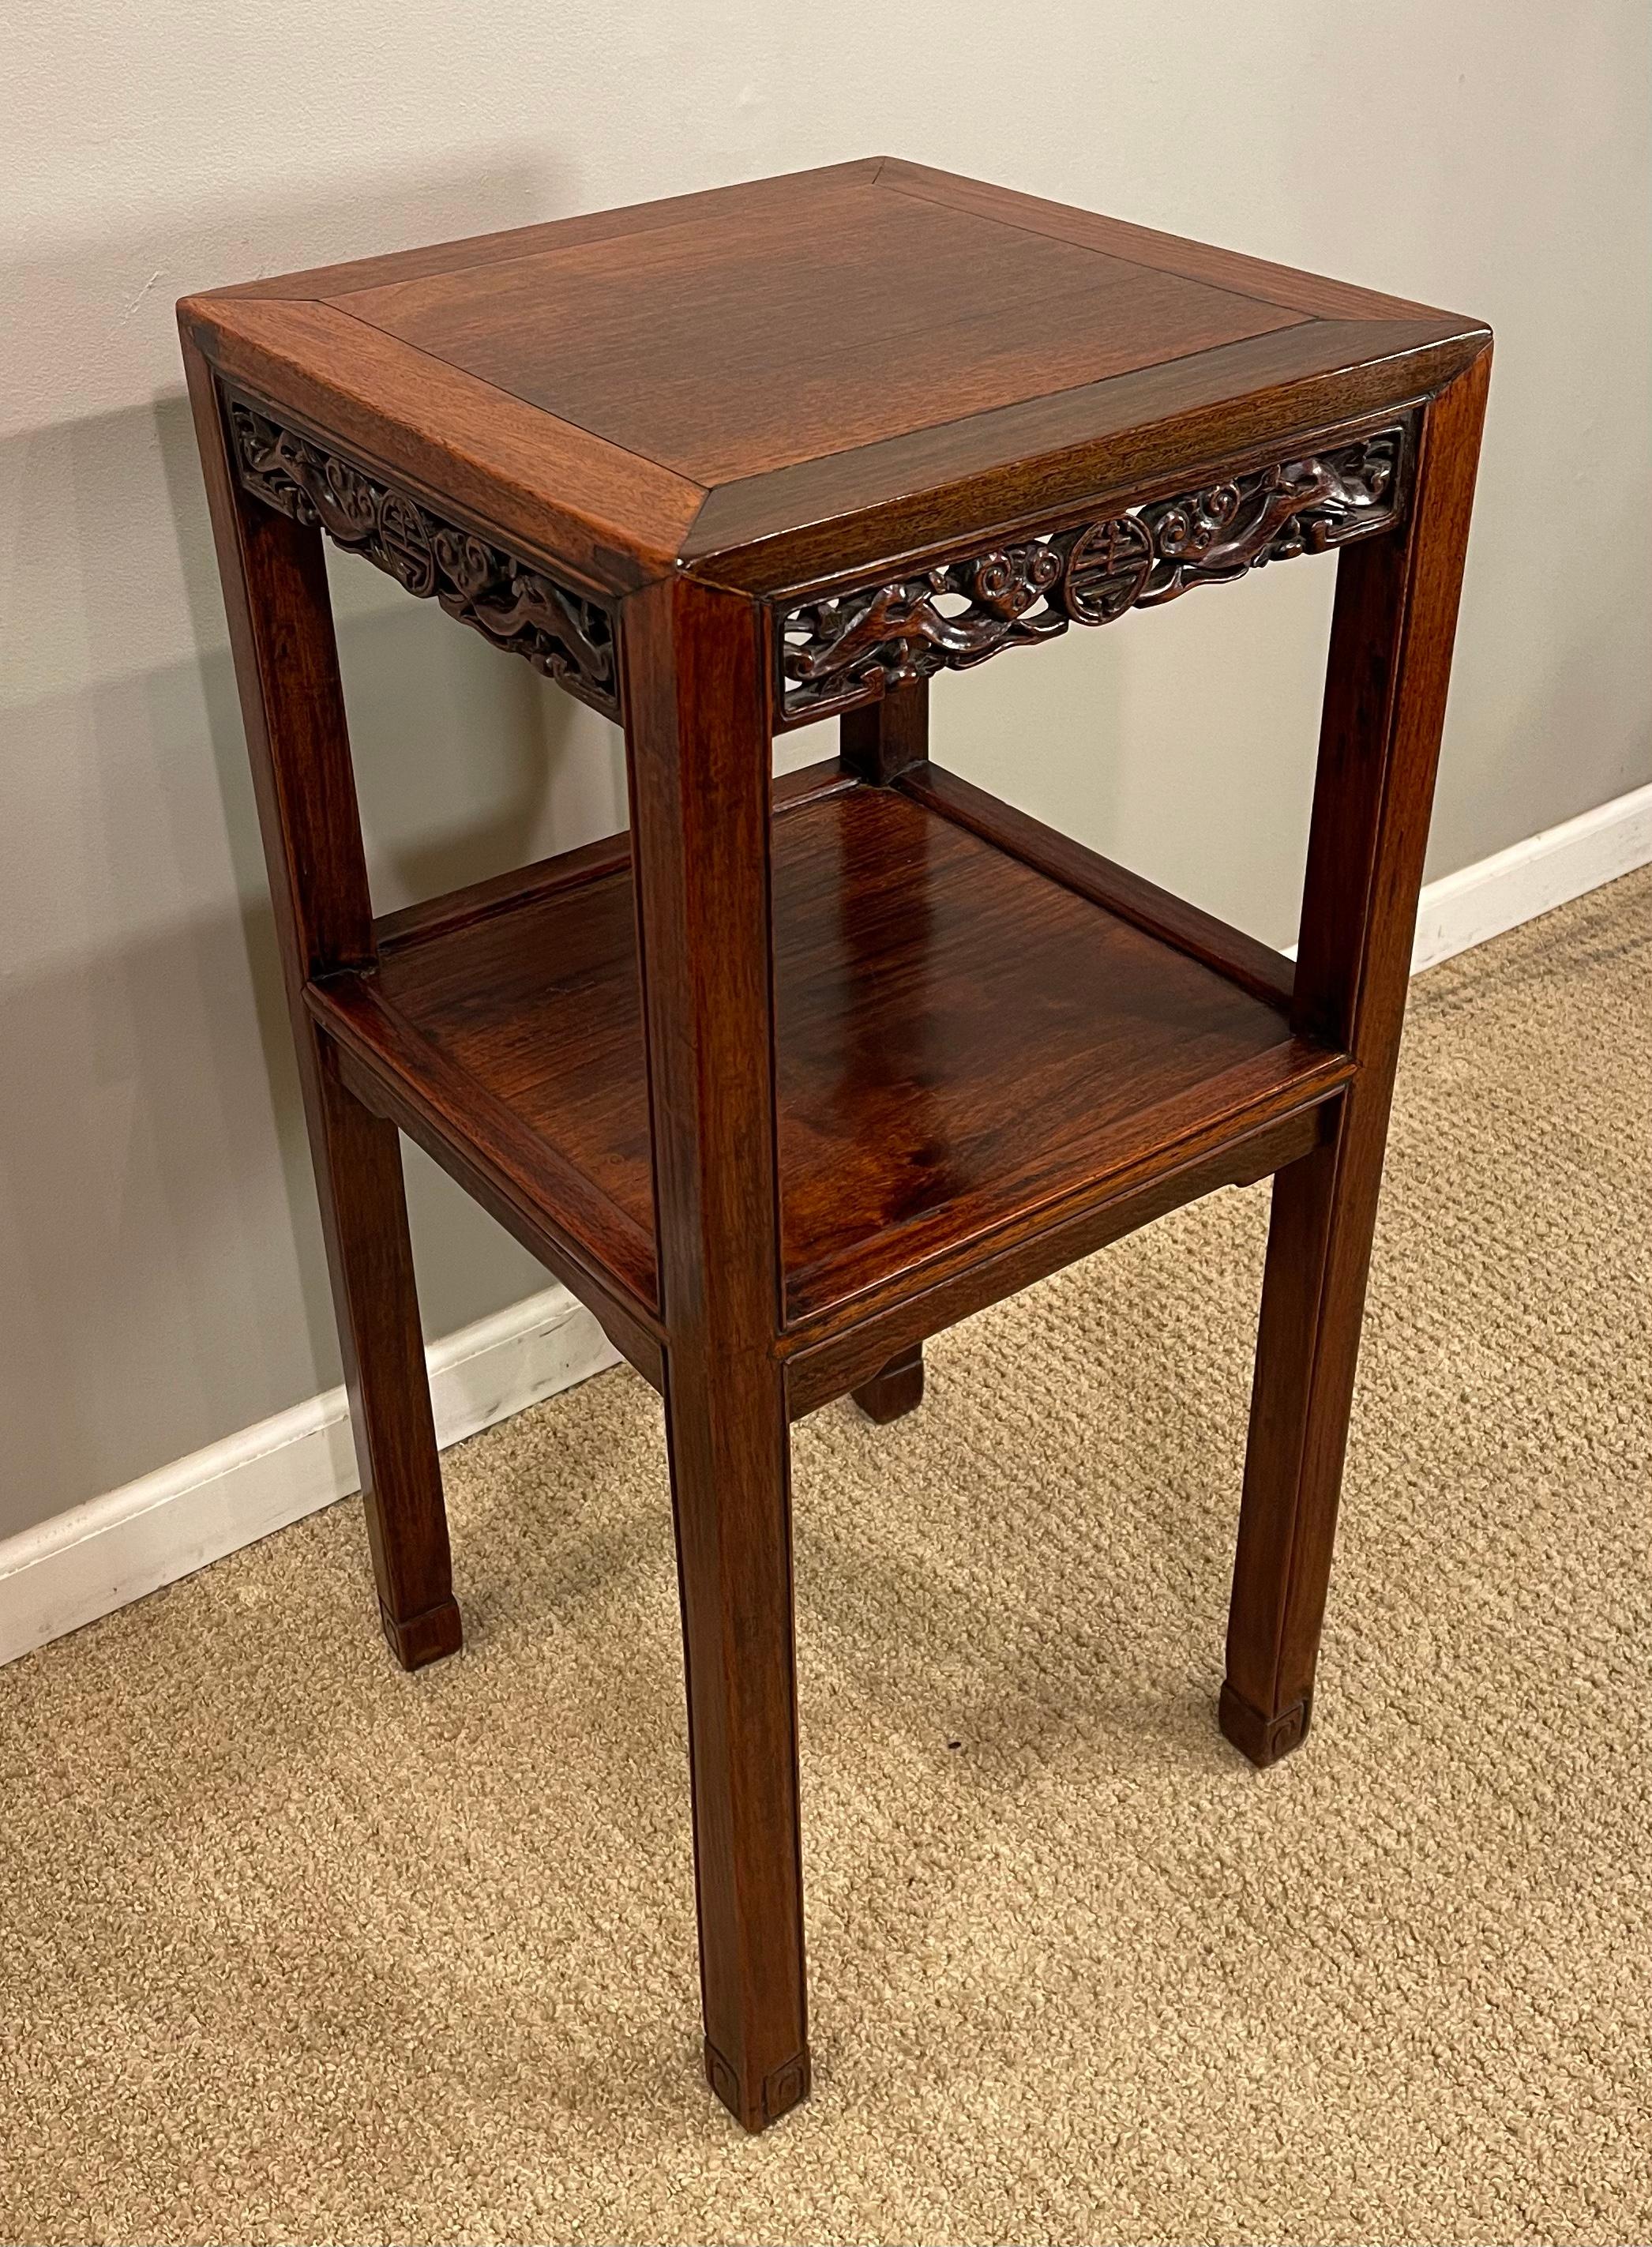 Chinese Export Chinese Hardwood 'Hungmu' Tea Table, Late 19th Century / Early 20th Century For Sale